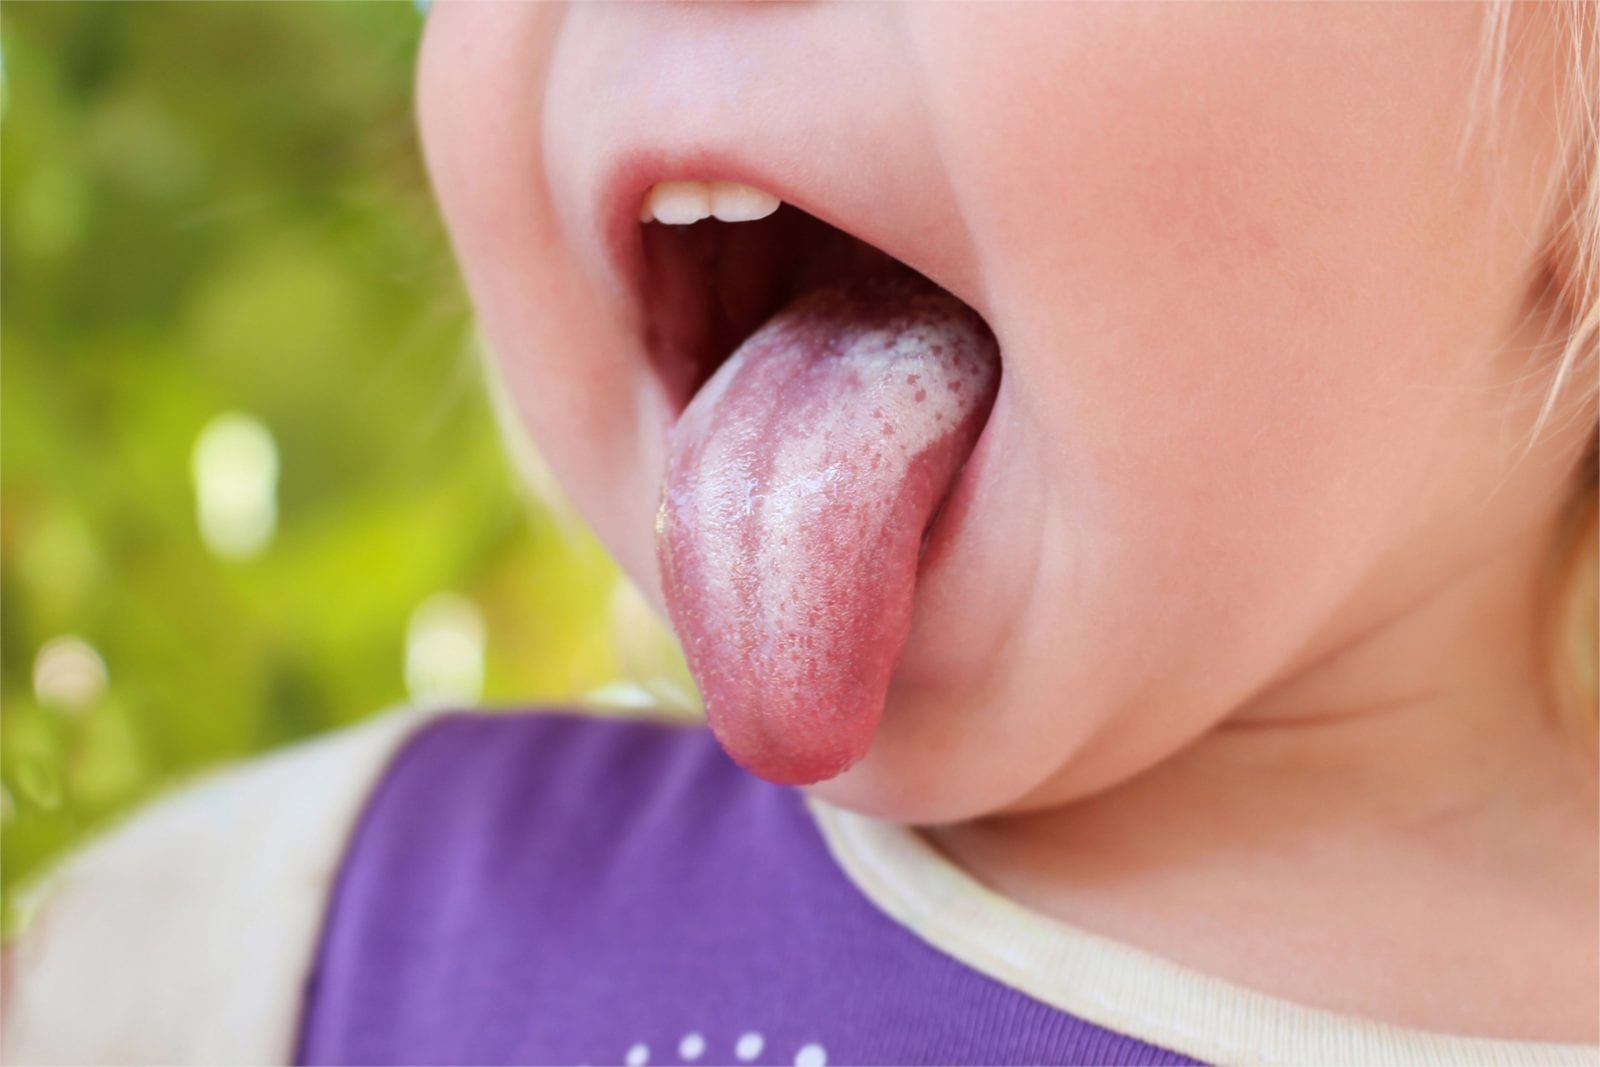 kid sticking their tongue out with oral thrush